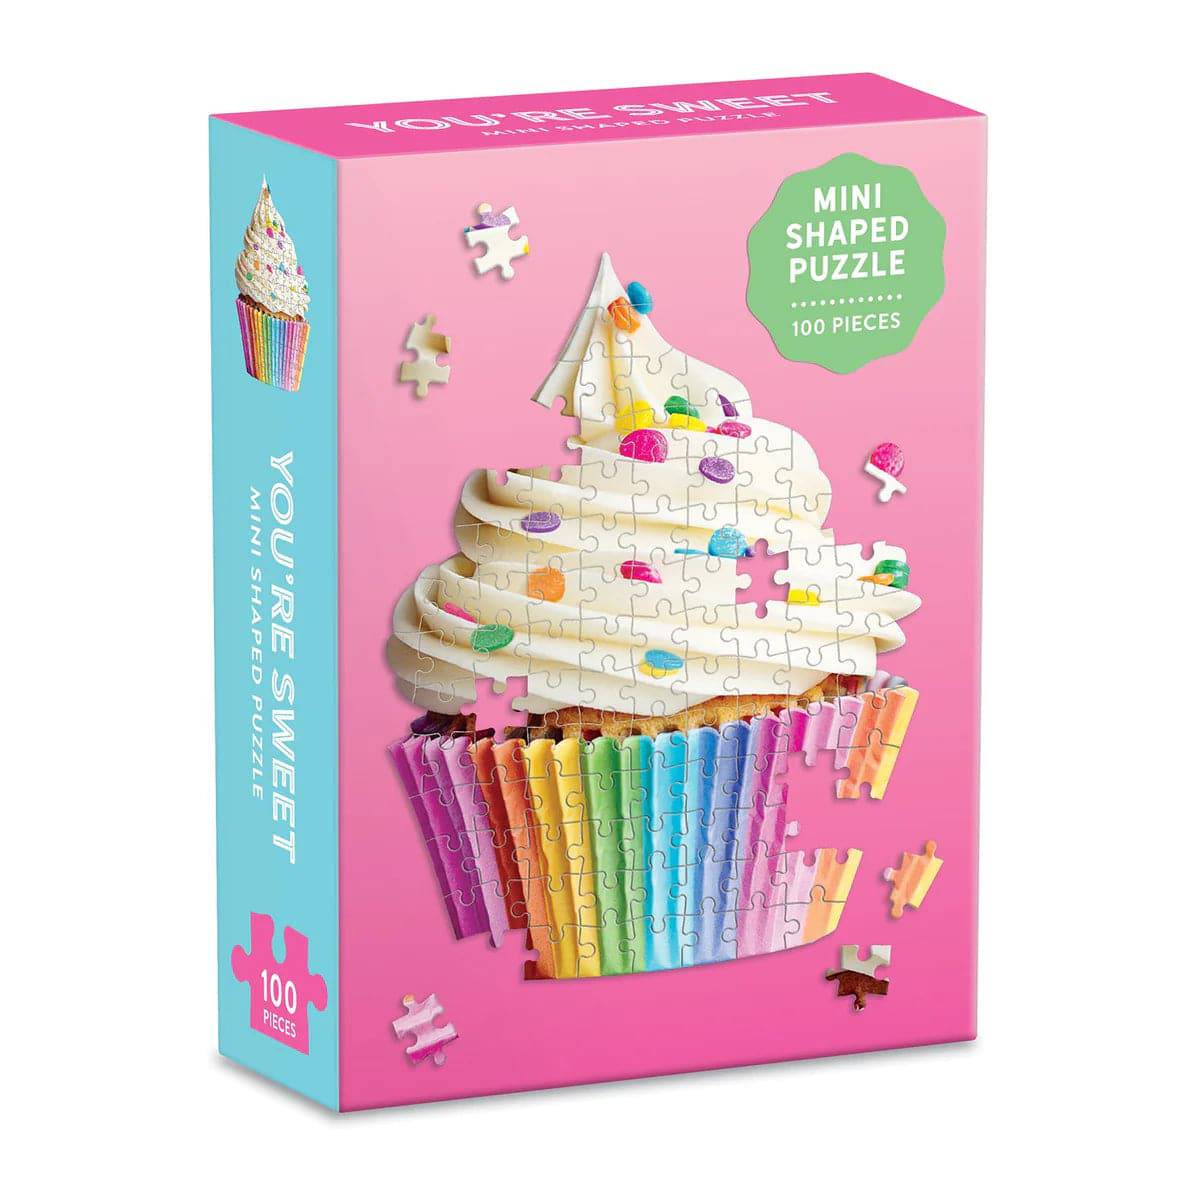 You're Sweet Cupcake 100 Piece Mini Shaped Jigsaw Puzzle - The Preppy Bunny